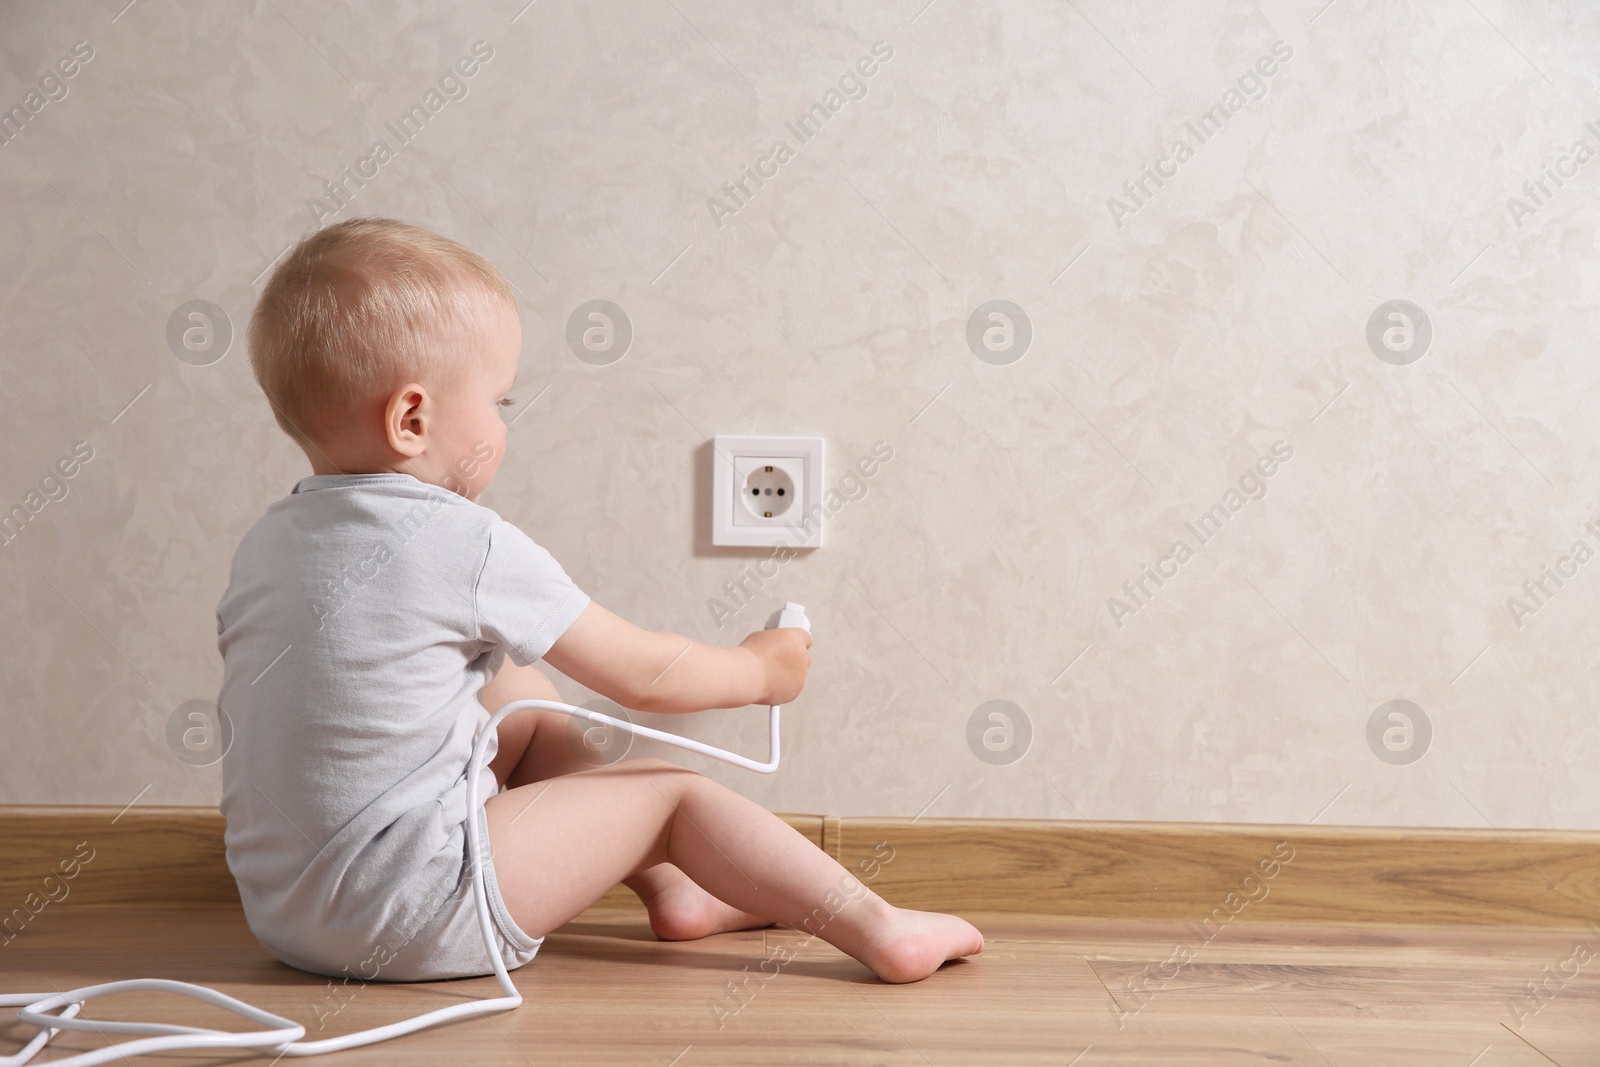 Photo of Little child playing with electrical socket and plug indoors, space for text. Dangerous situation